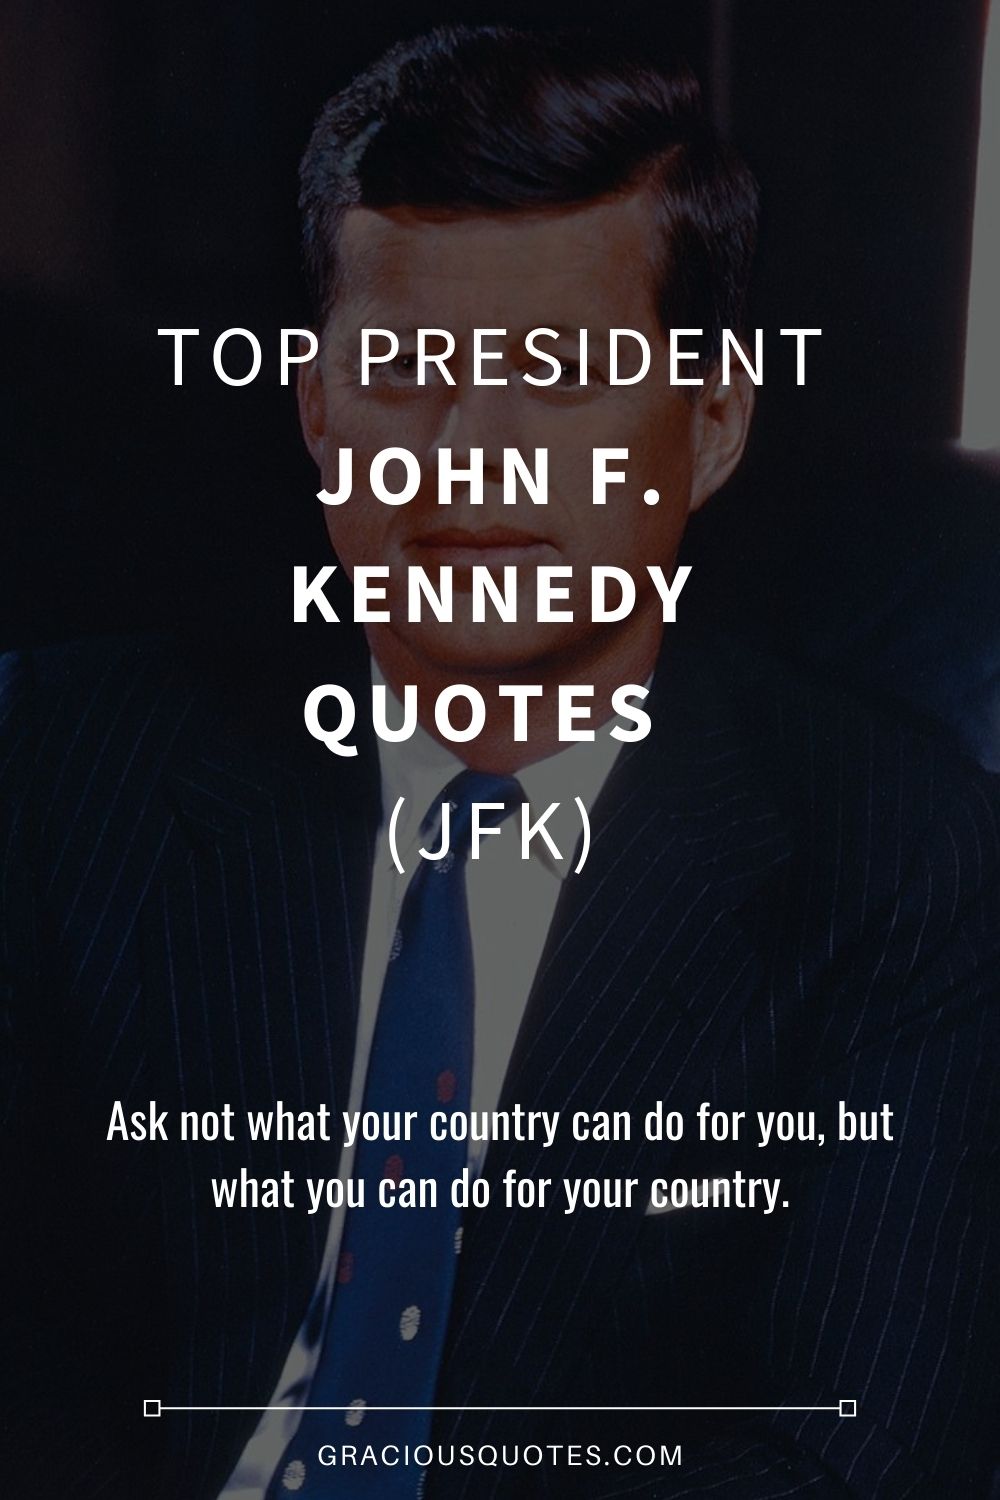 Top President John F. Kennedy Quotes (JFK) - Gracious Quotes